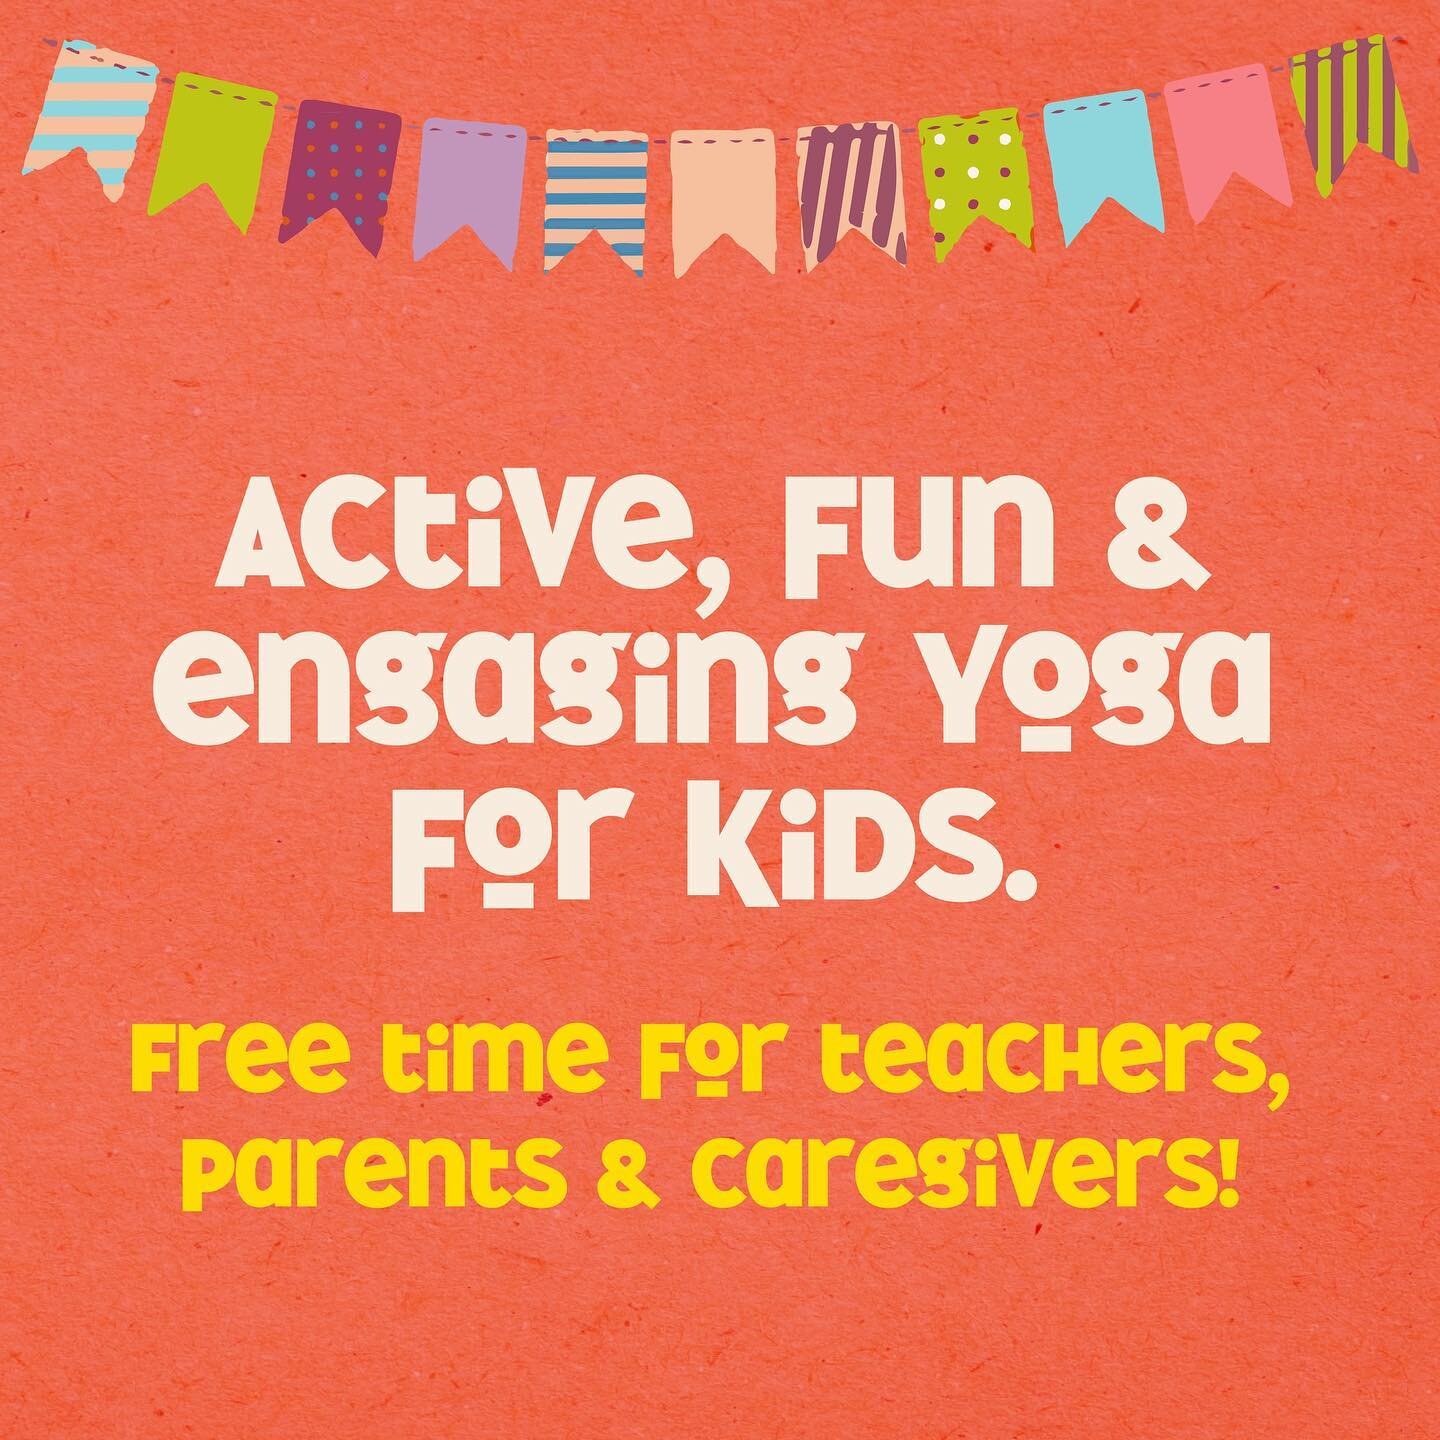 And the adventure gets even more fun with classes budding around town. There are still openings available for yoga during school time hours. Adding yoga to a school&rsquo;s curriculum is really a win for teachers, parents, students&hellip;. really ev